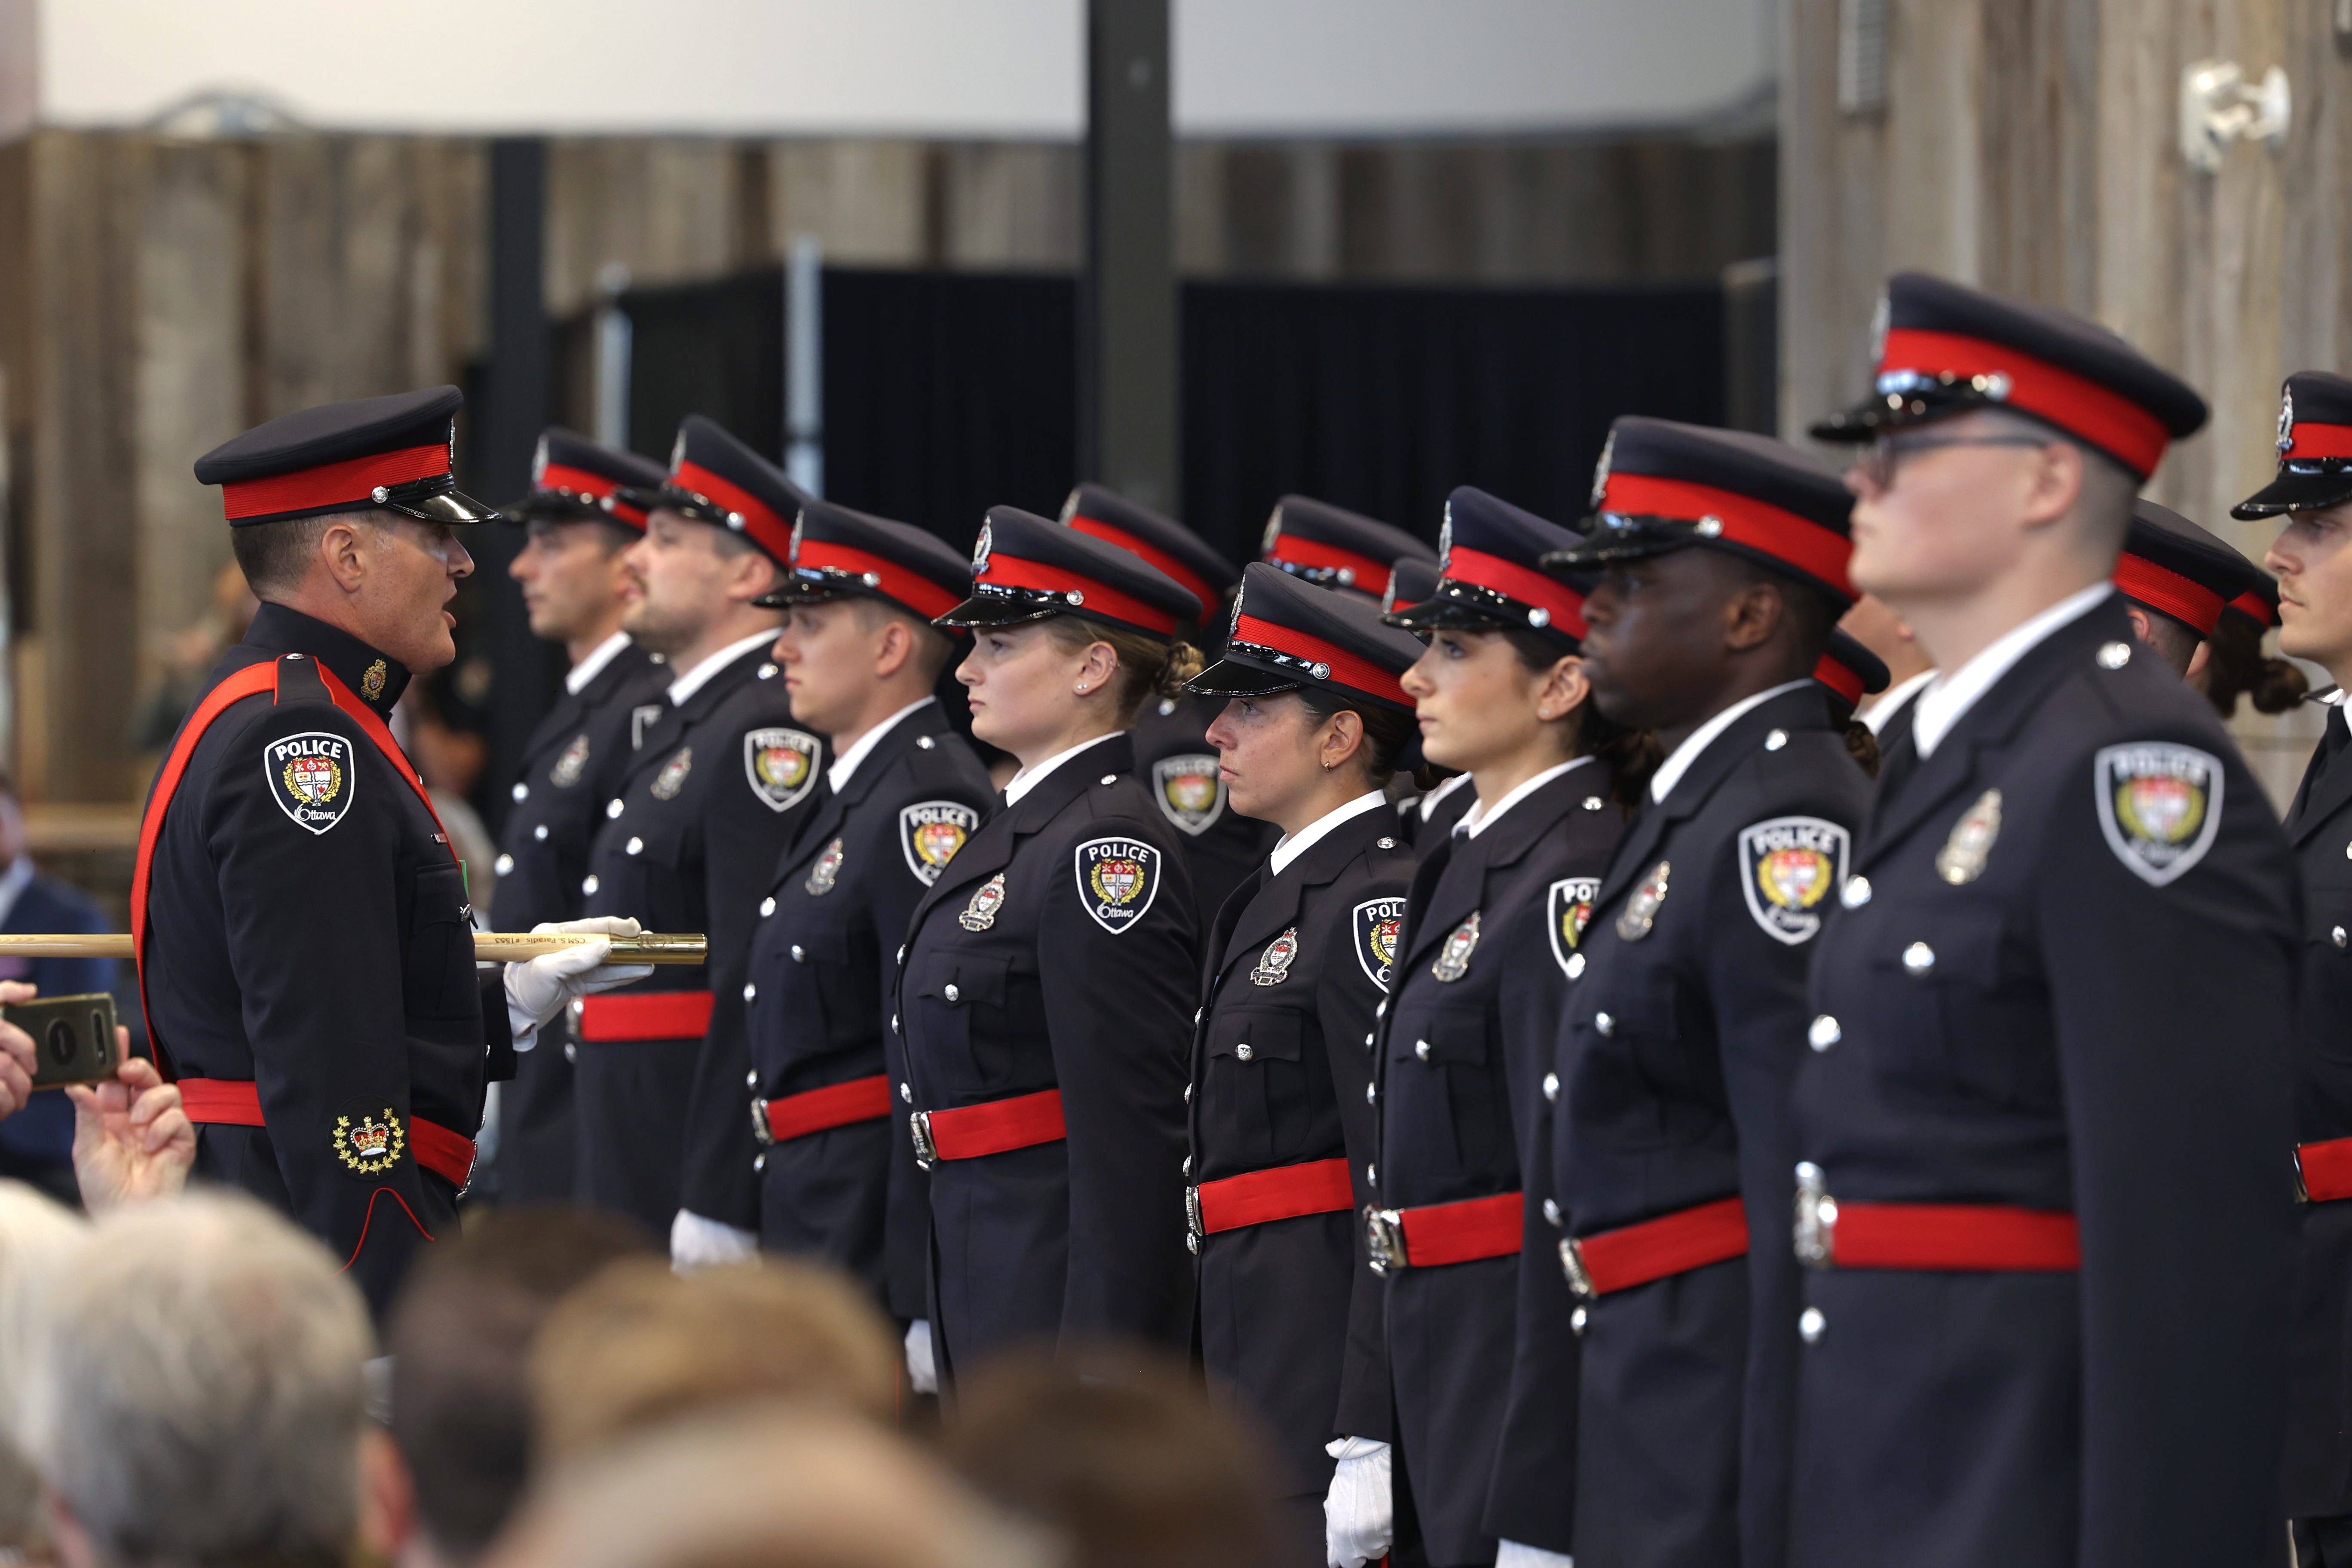 Officers at the ceremony